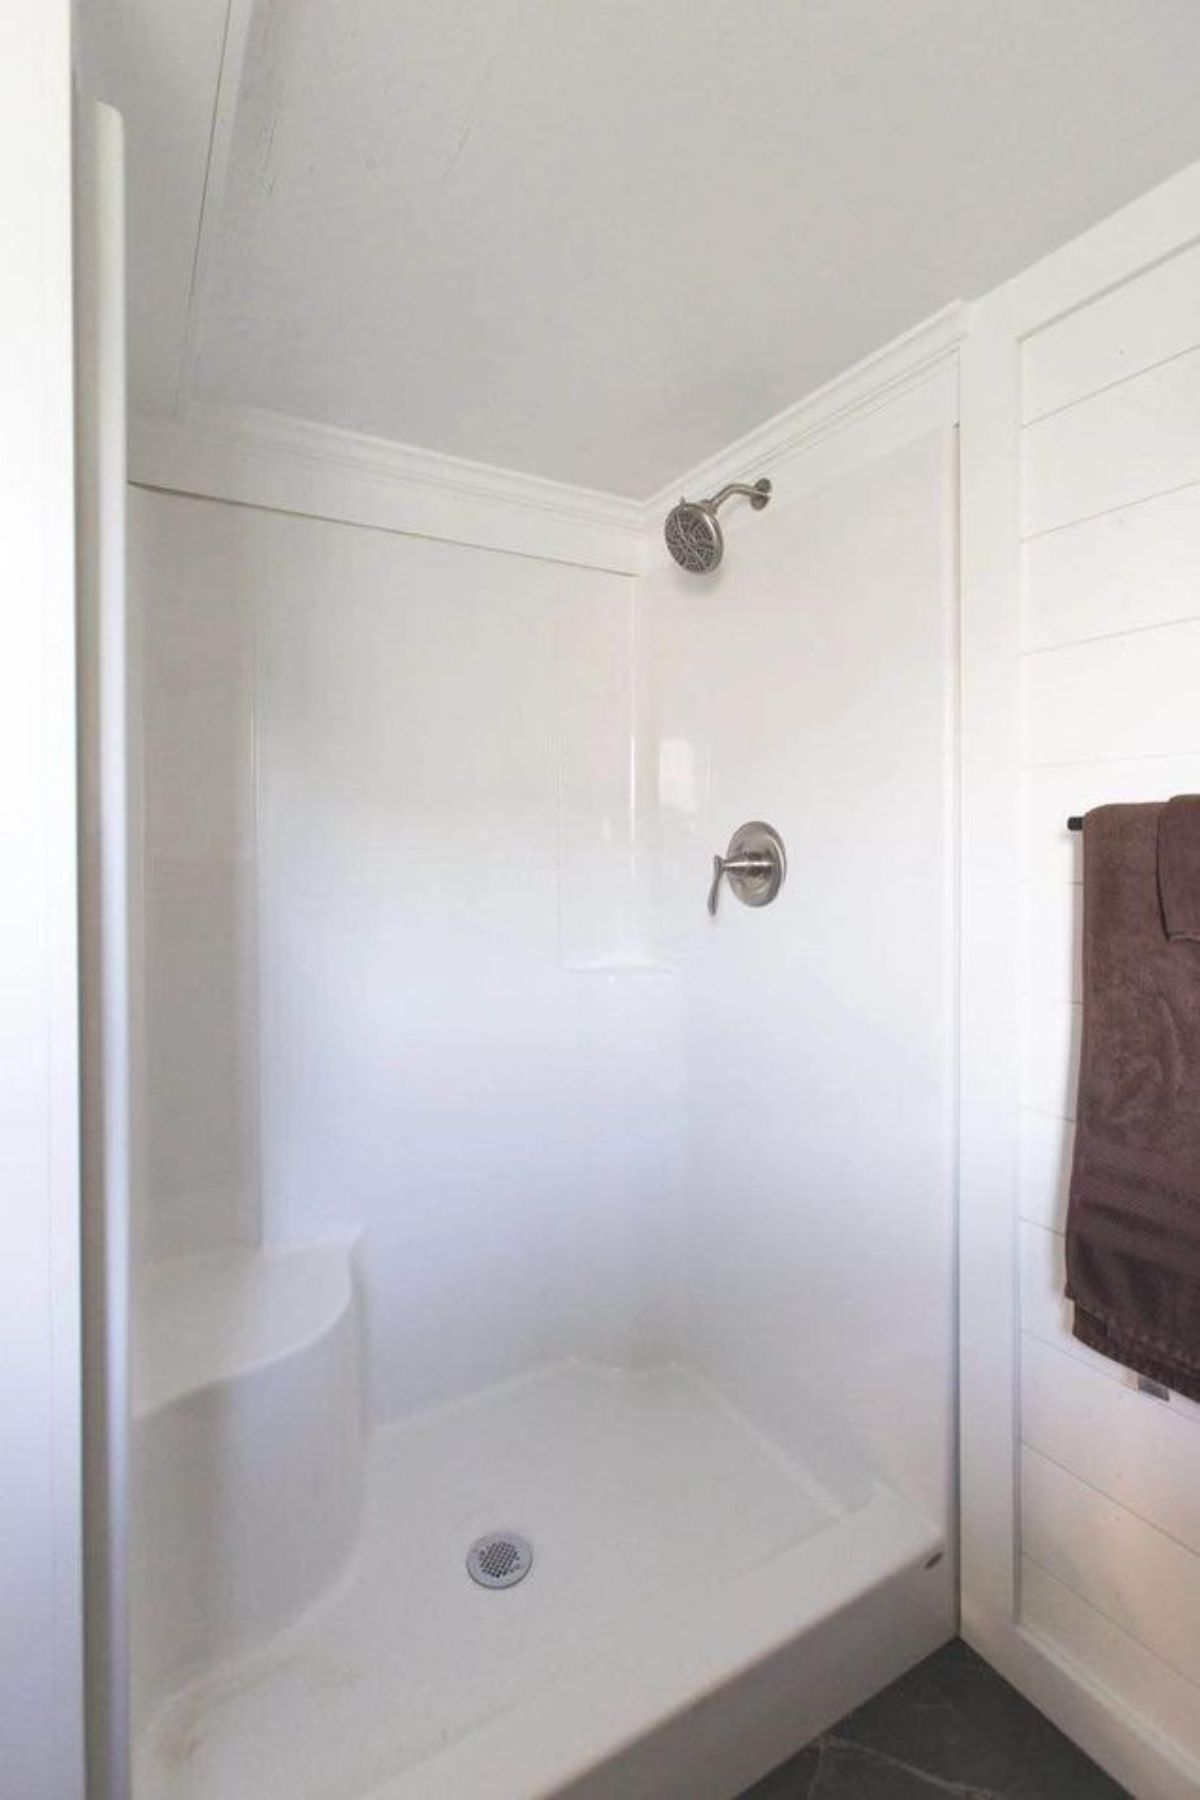 Separate shower area in bathroom of one bedroom tiny home